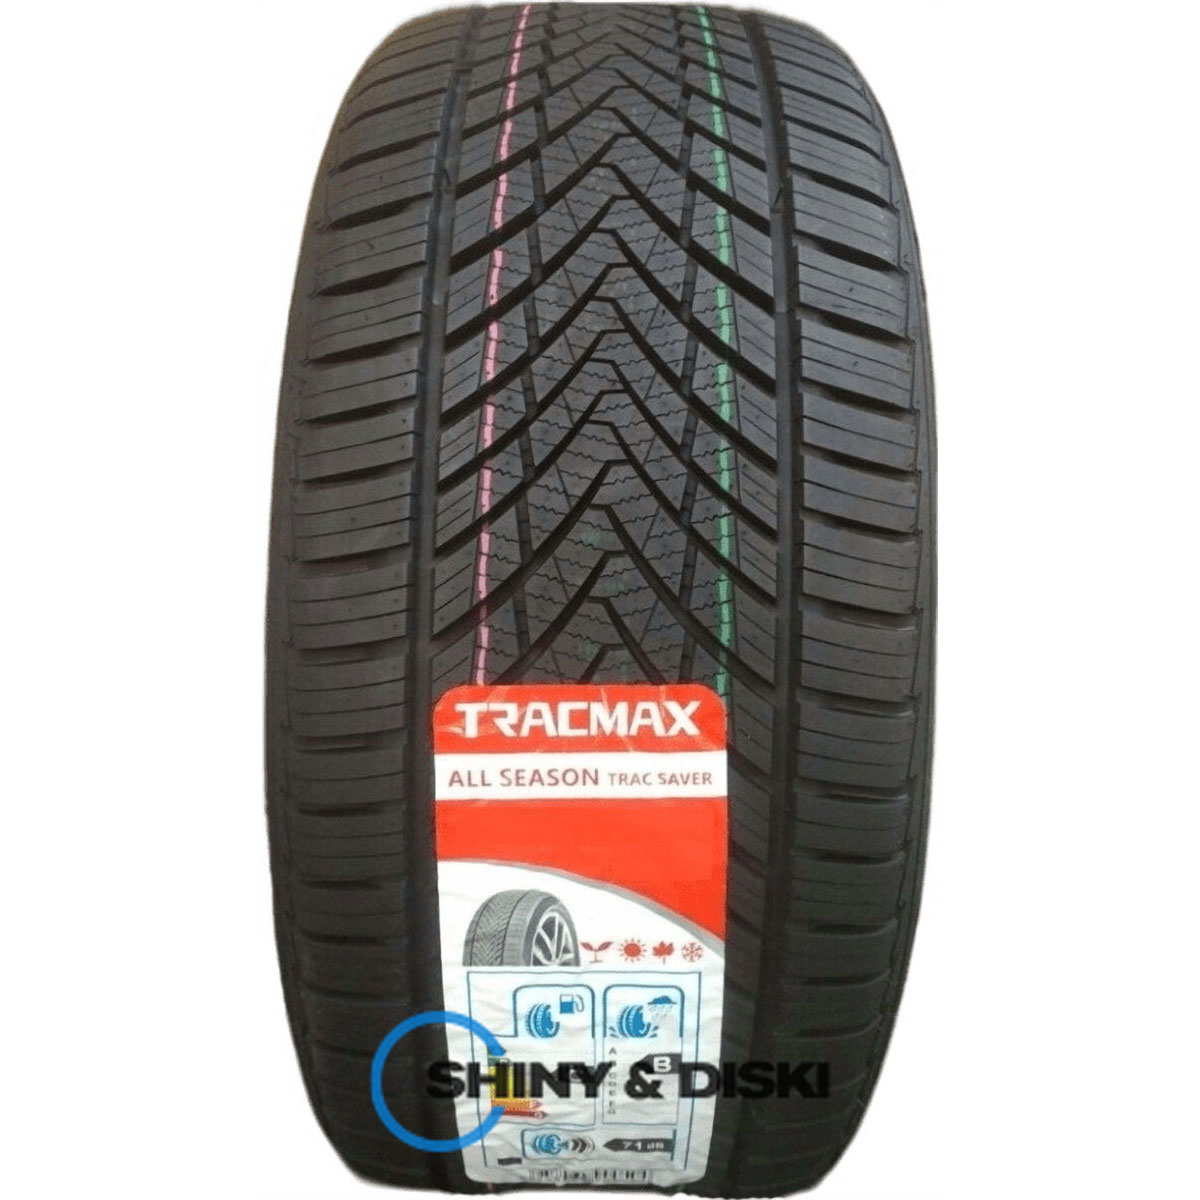 покрышки tracmax a/s trac saver 195/55 r20 95h xl